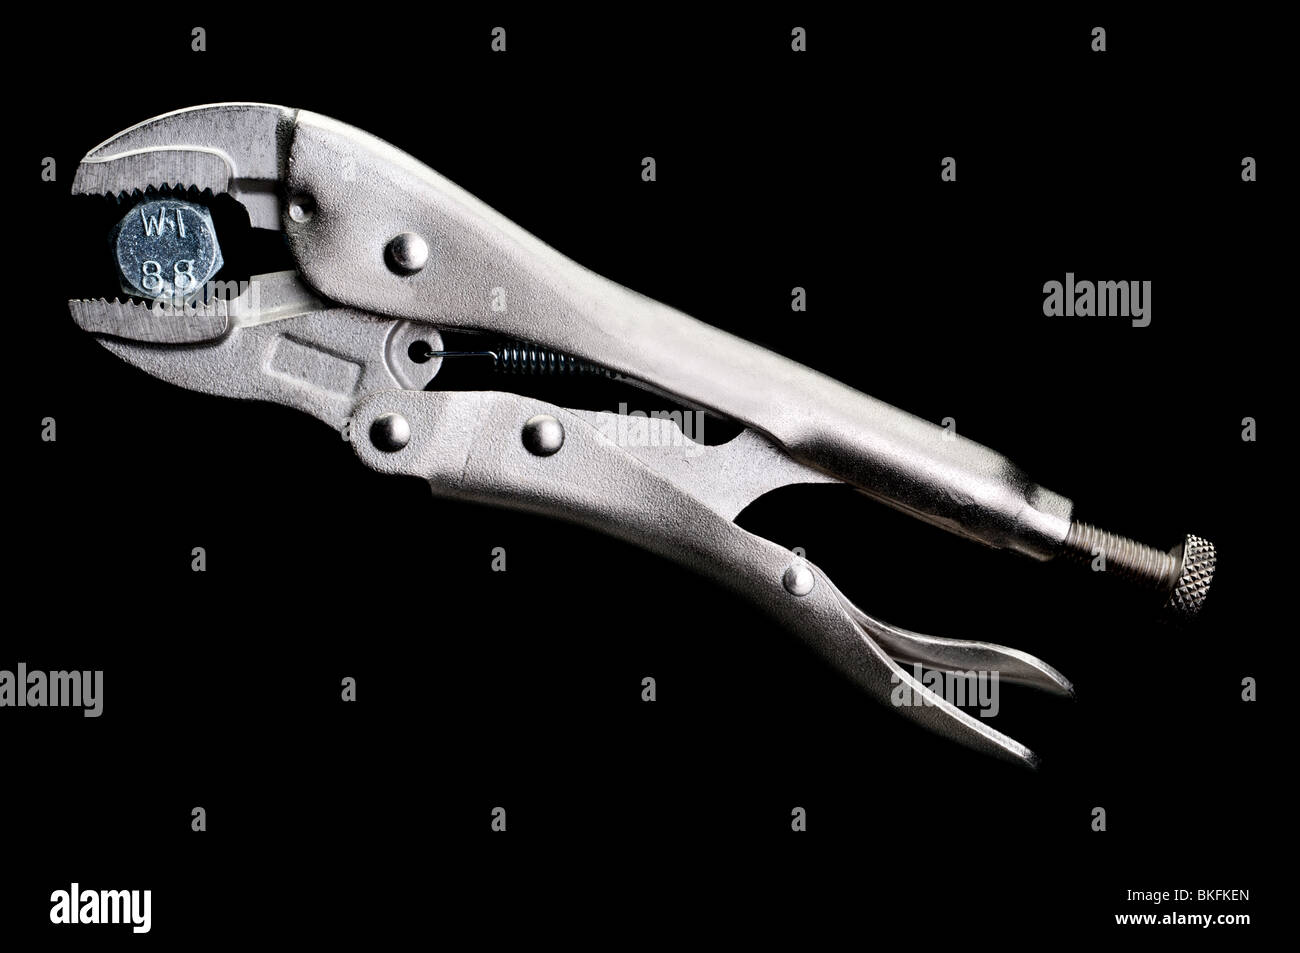 locking pliers locked on to a bolt on black Stock Photo